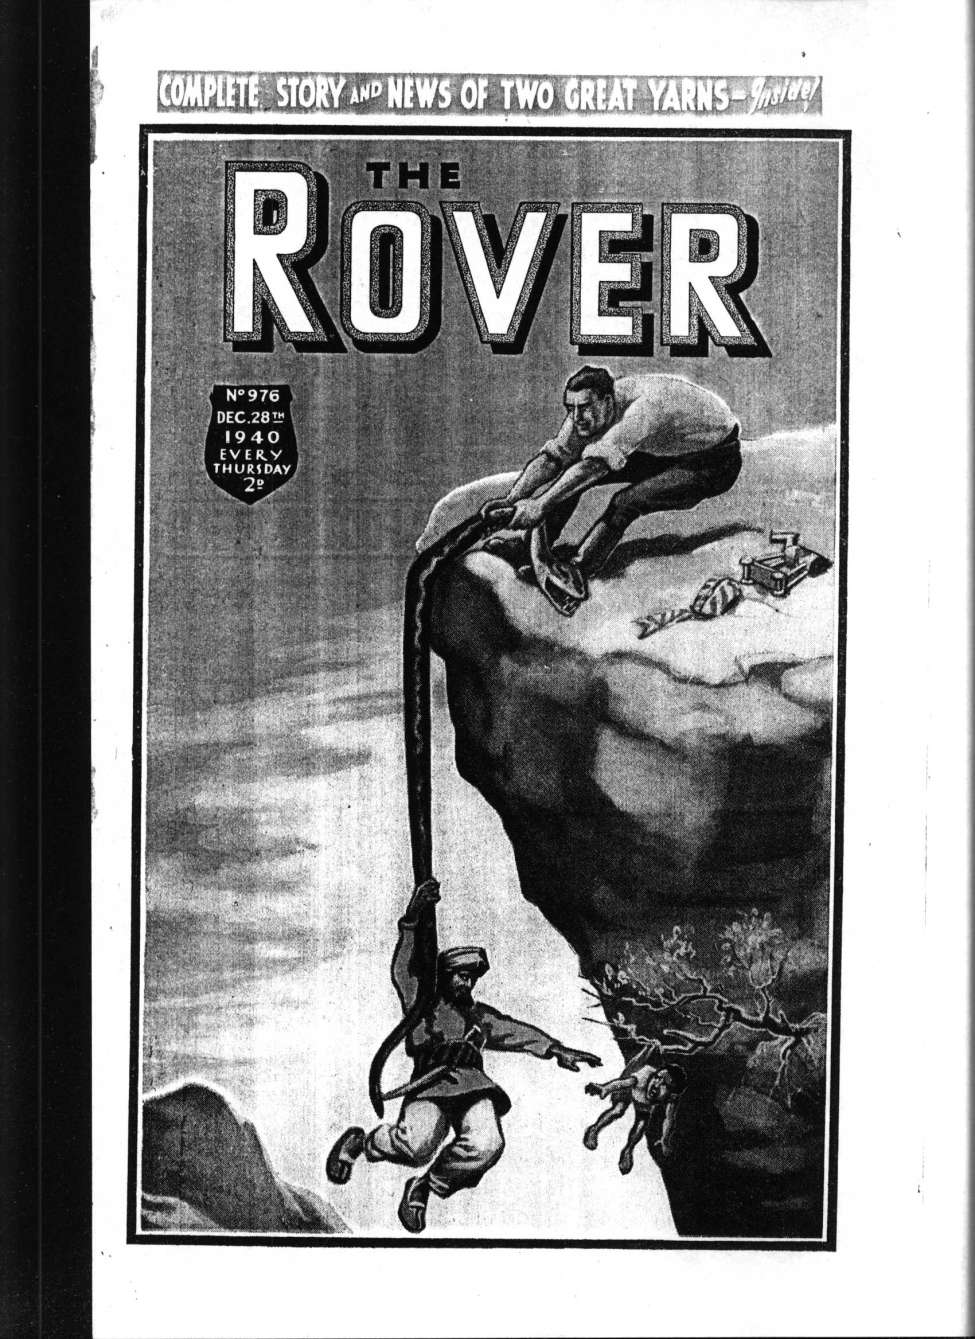 Book Cover For The Rover 976